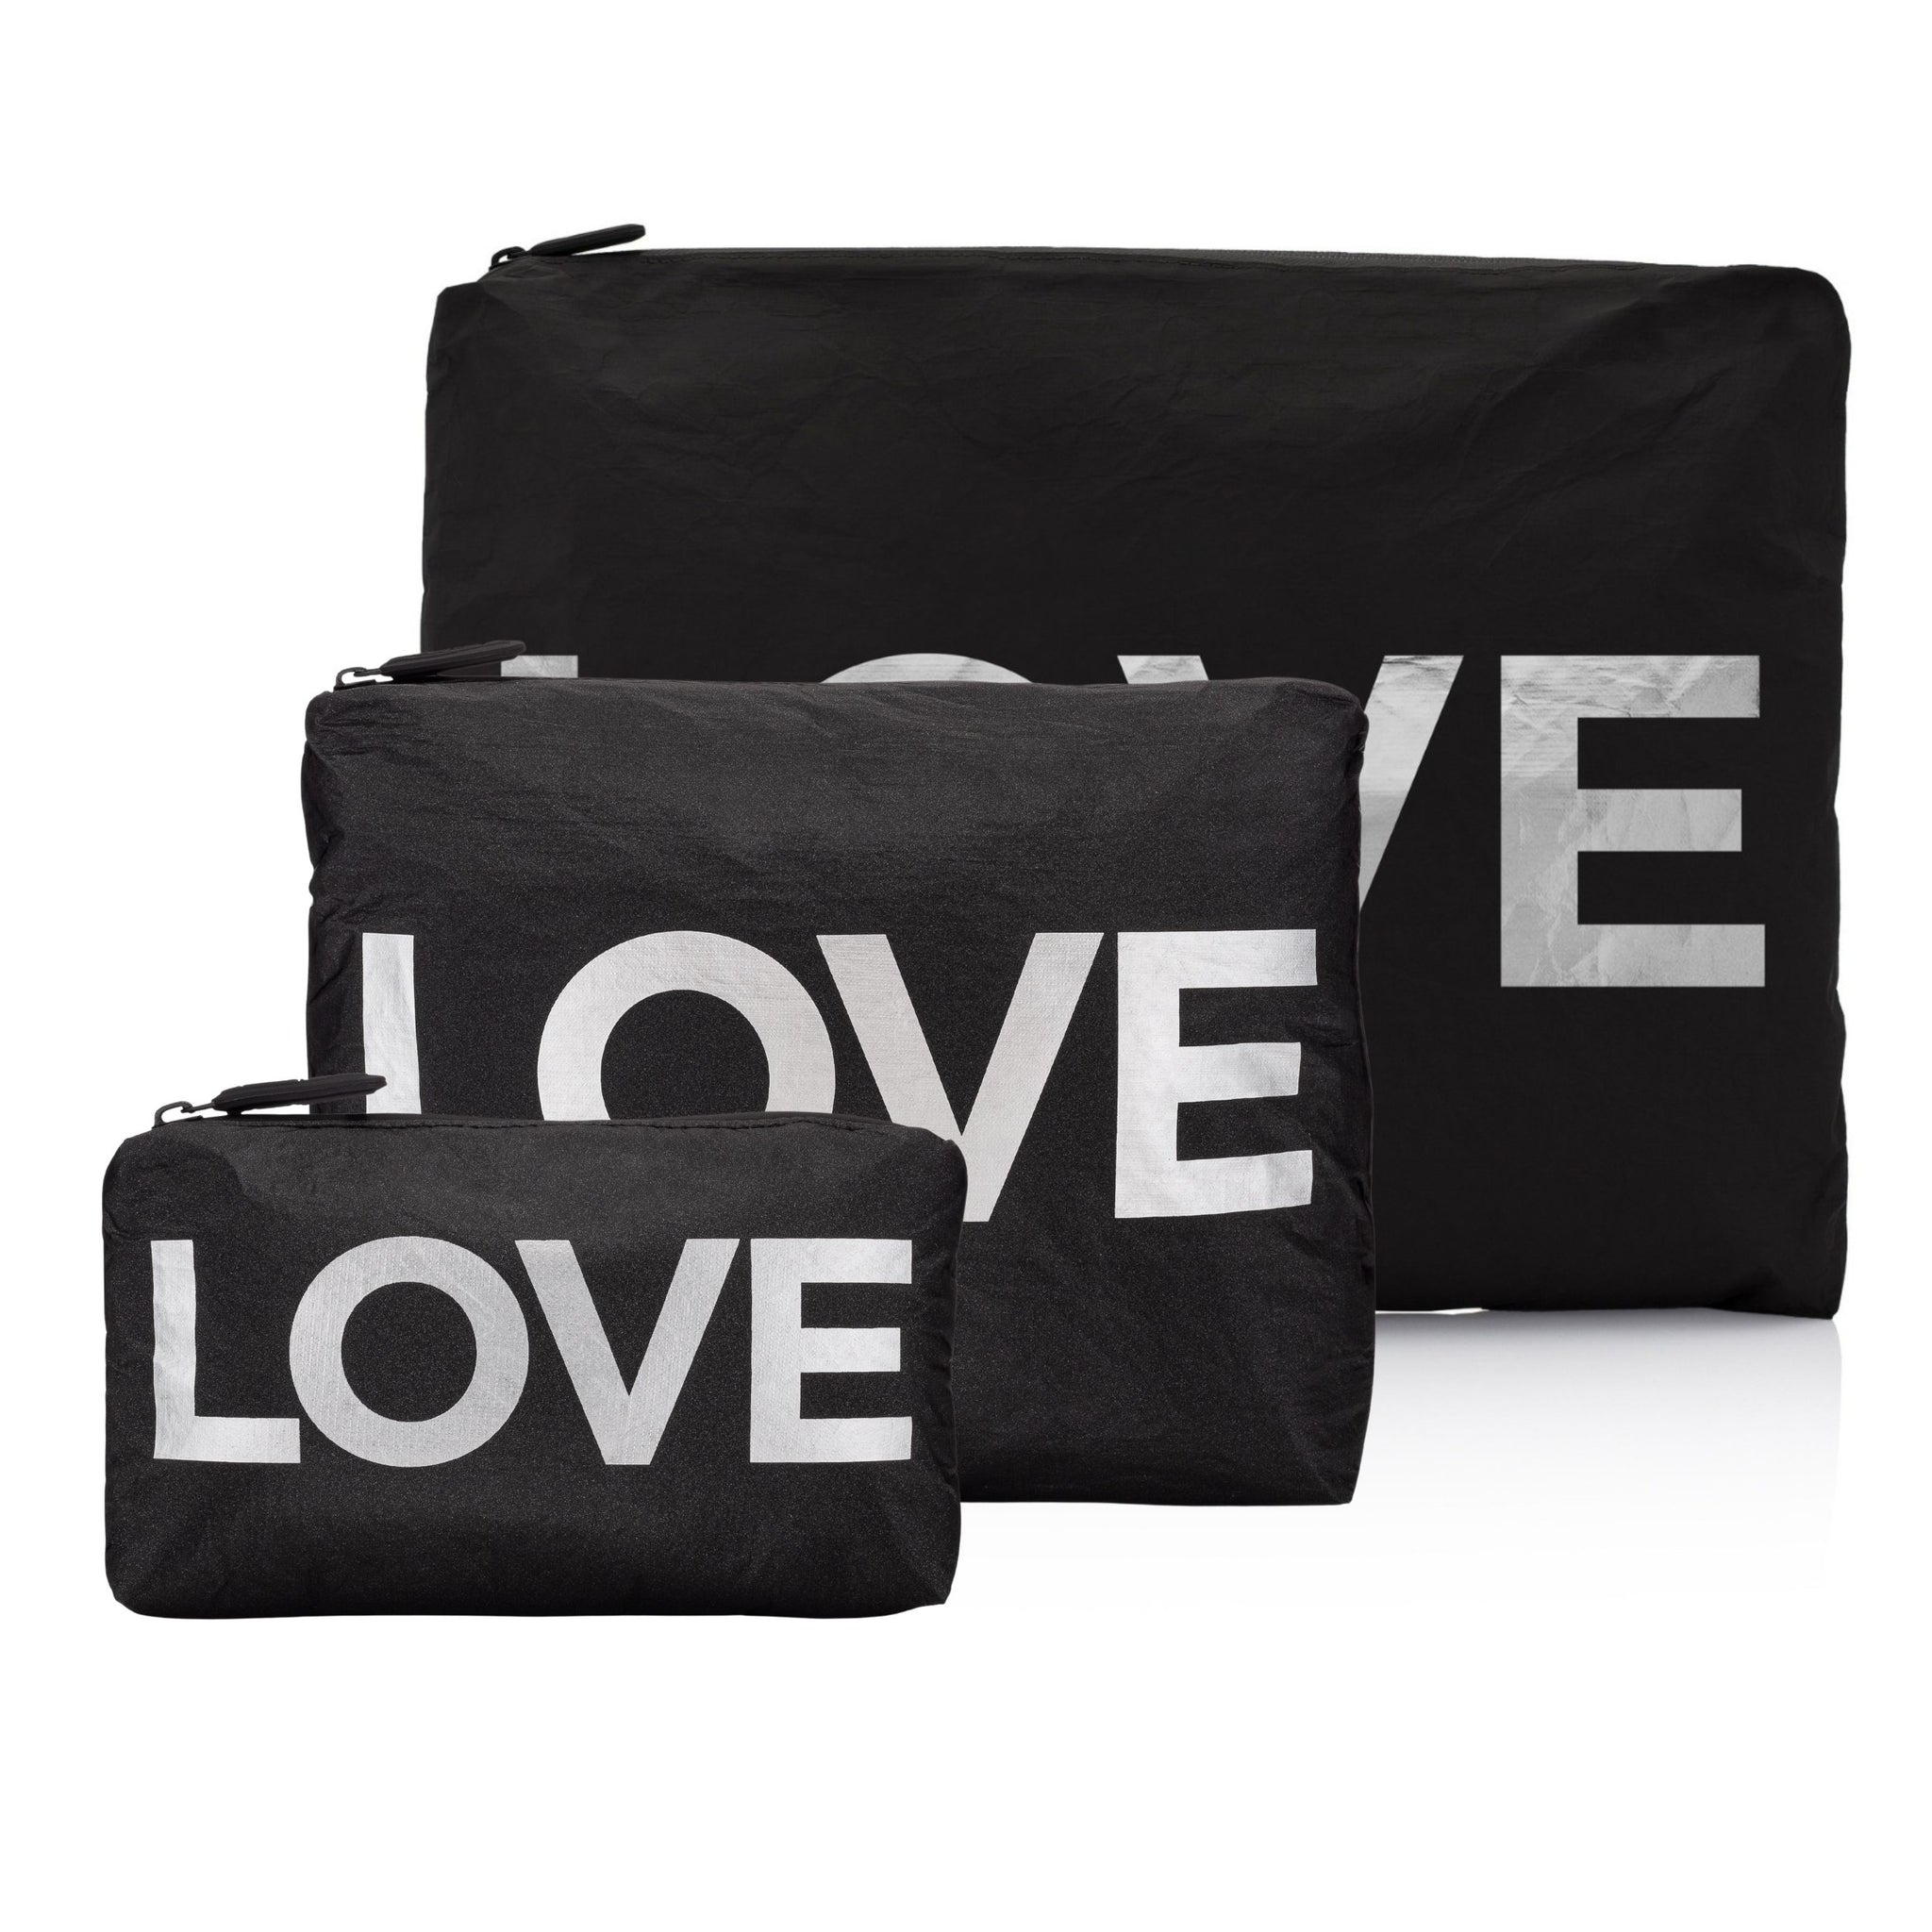 Set of Three - Black with Silver "LOVE"